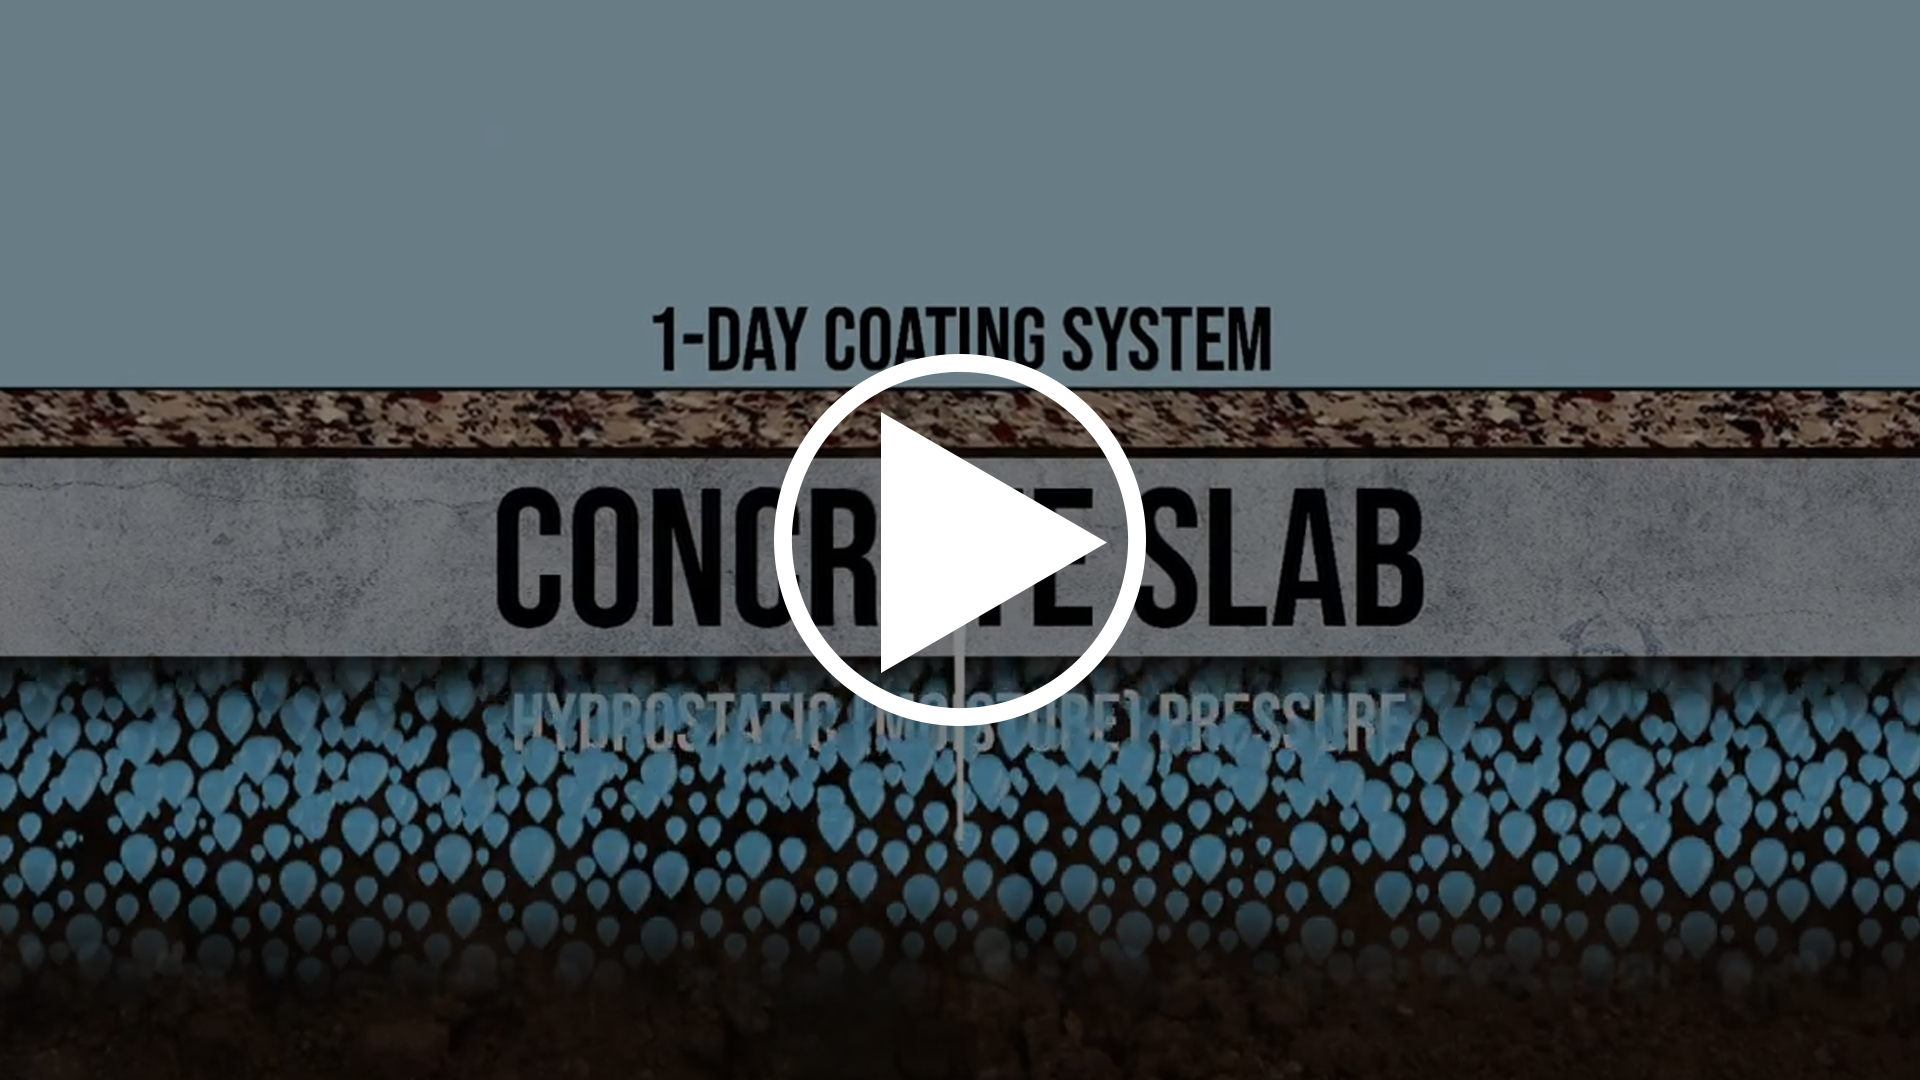 Don't Fall Victim to 1-Day Coating System!